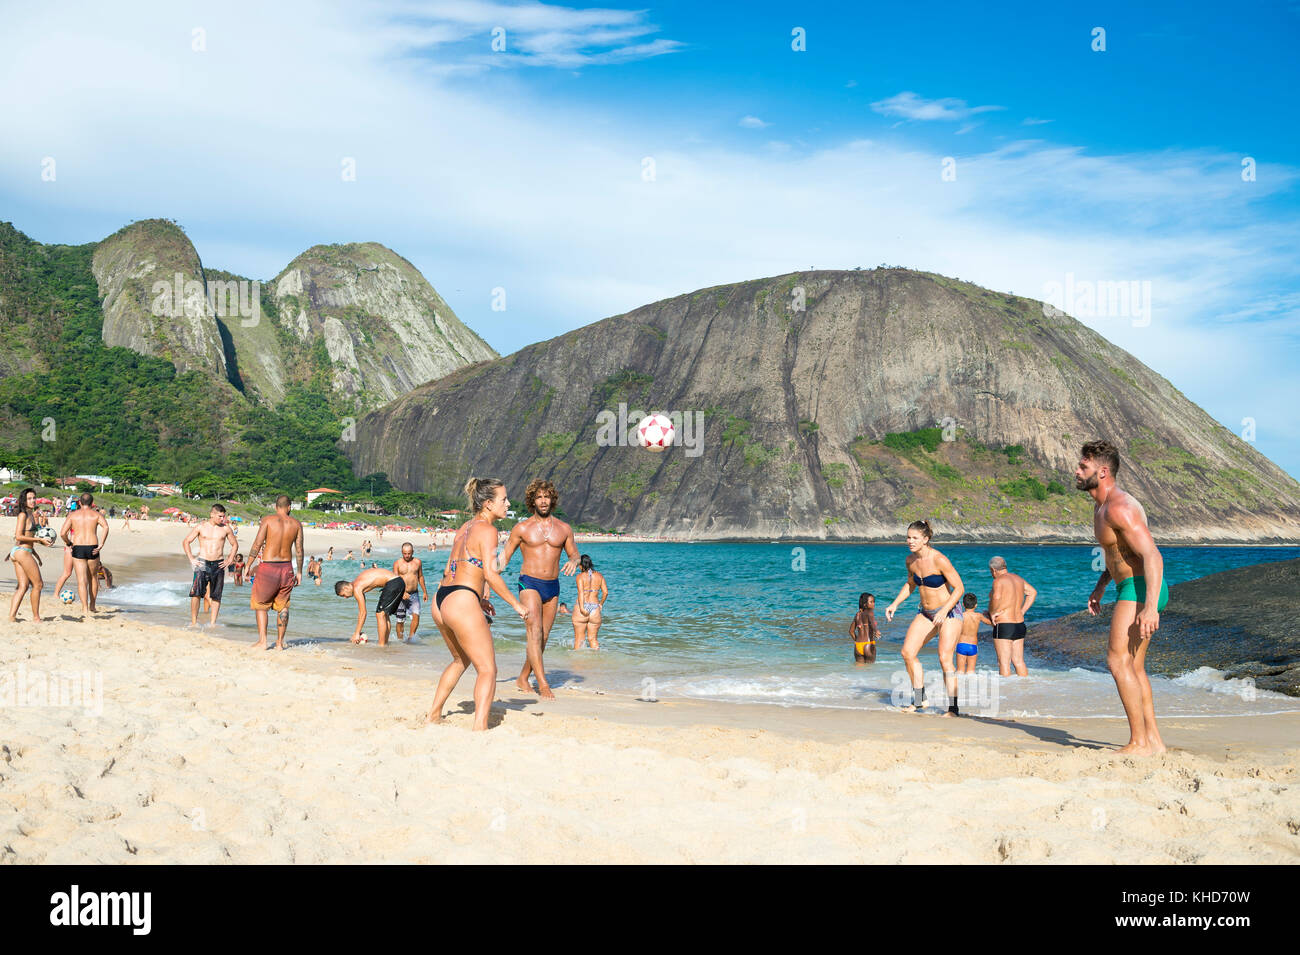 RIO DE JANEIRO - MARCH 4, 2017: Young Brazilians play a game of keepy-uppies (known locally as altinho) on the shore of Itacoatiara Beach. Stock Photo